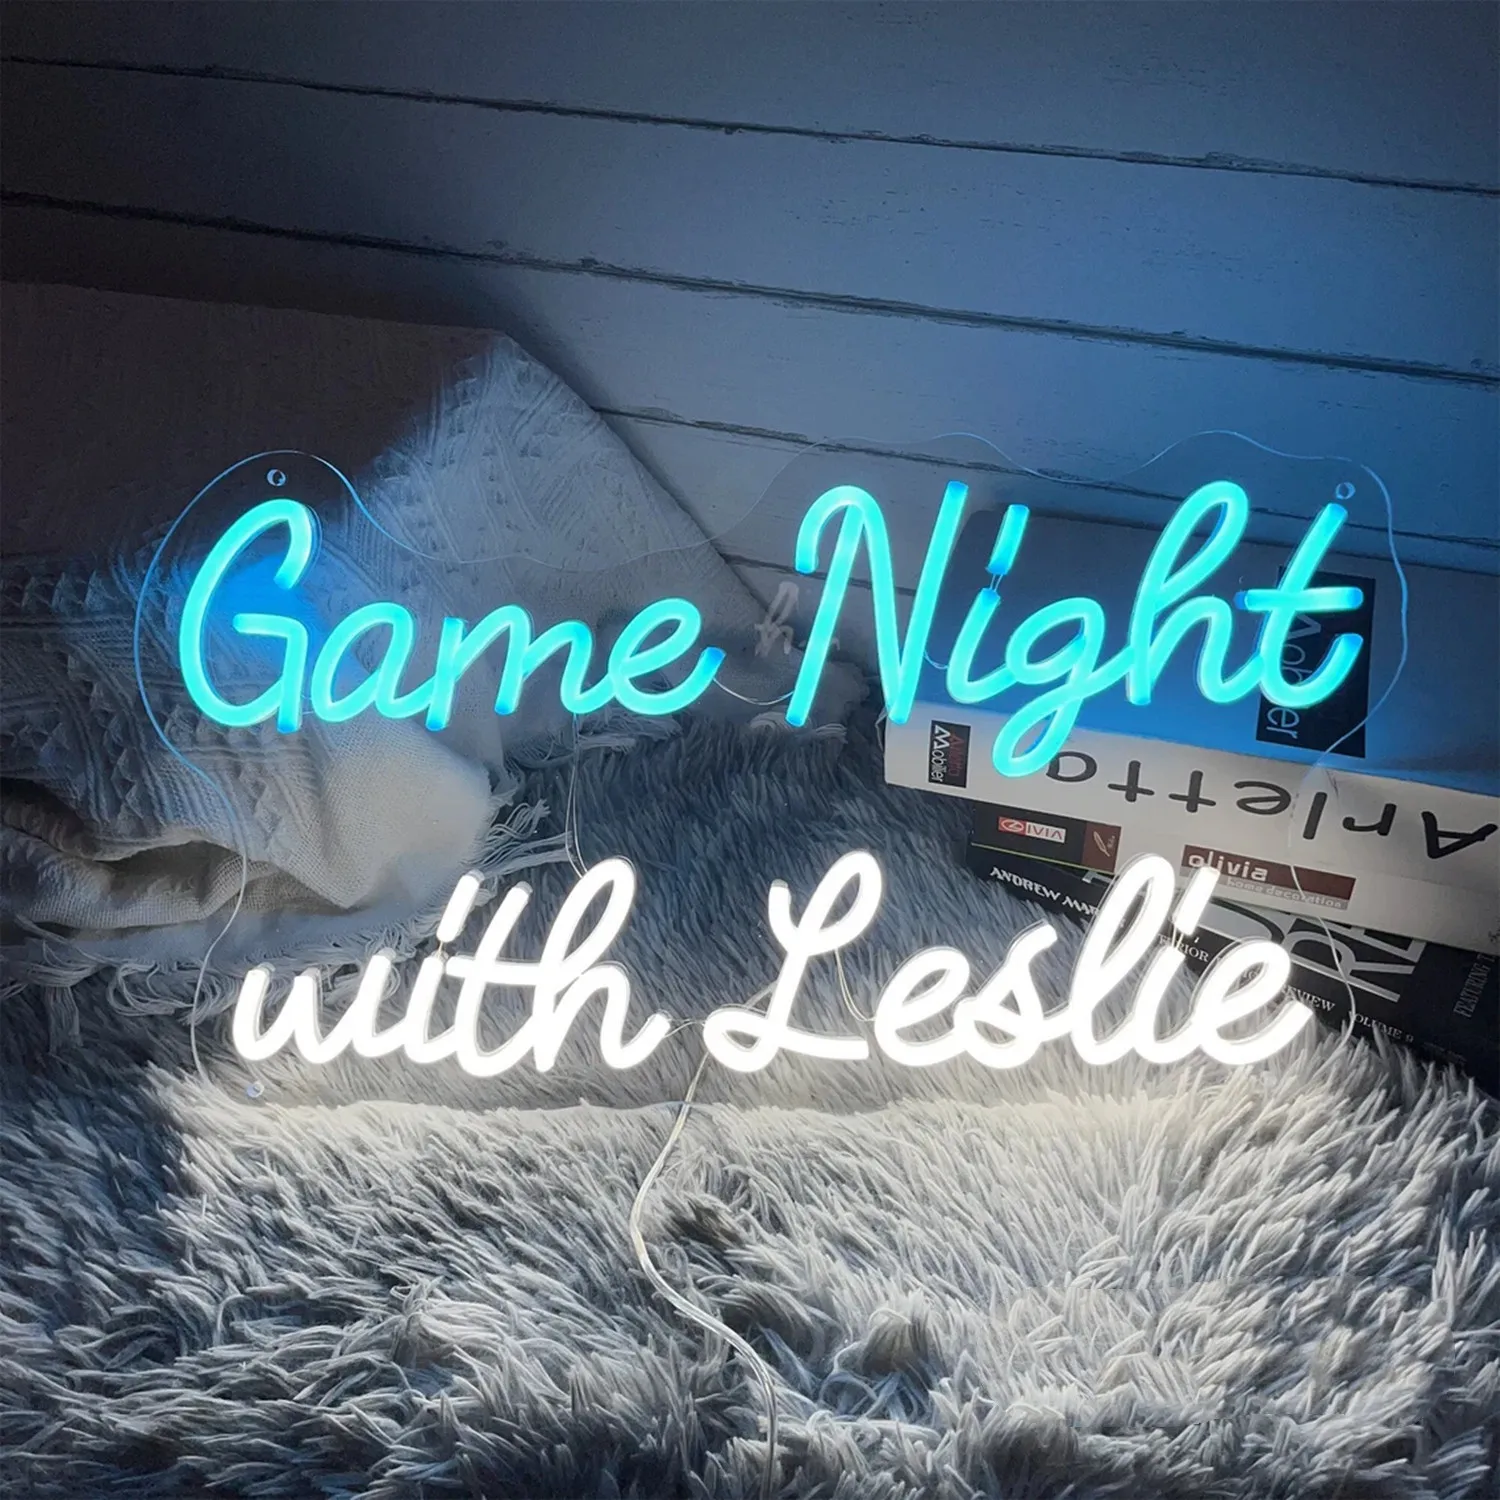 game-night-with-leslie-led-neon-signs-light-for-teen-boy-game-room-decor-bedroom-wall-decoration-accessrespiration-prbar-gift